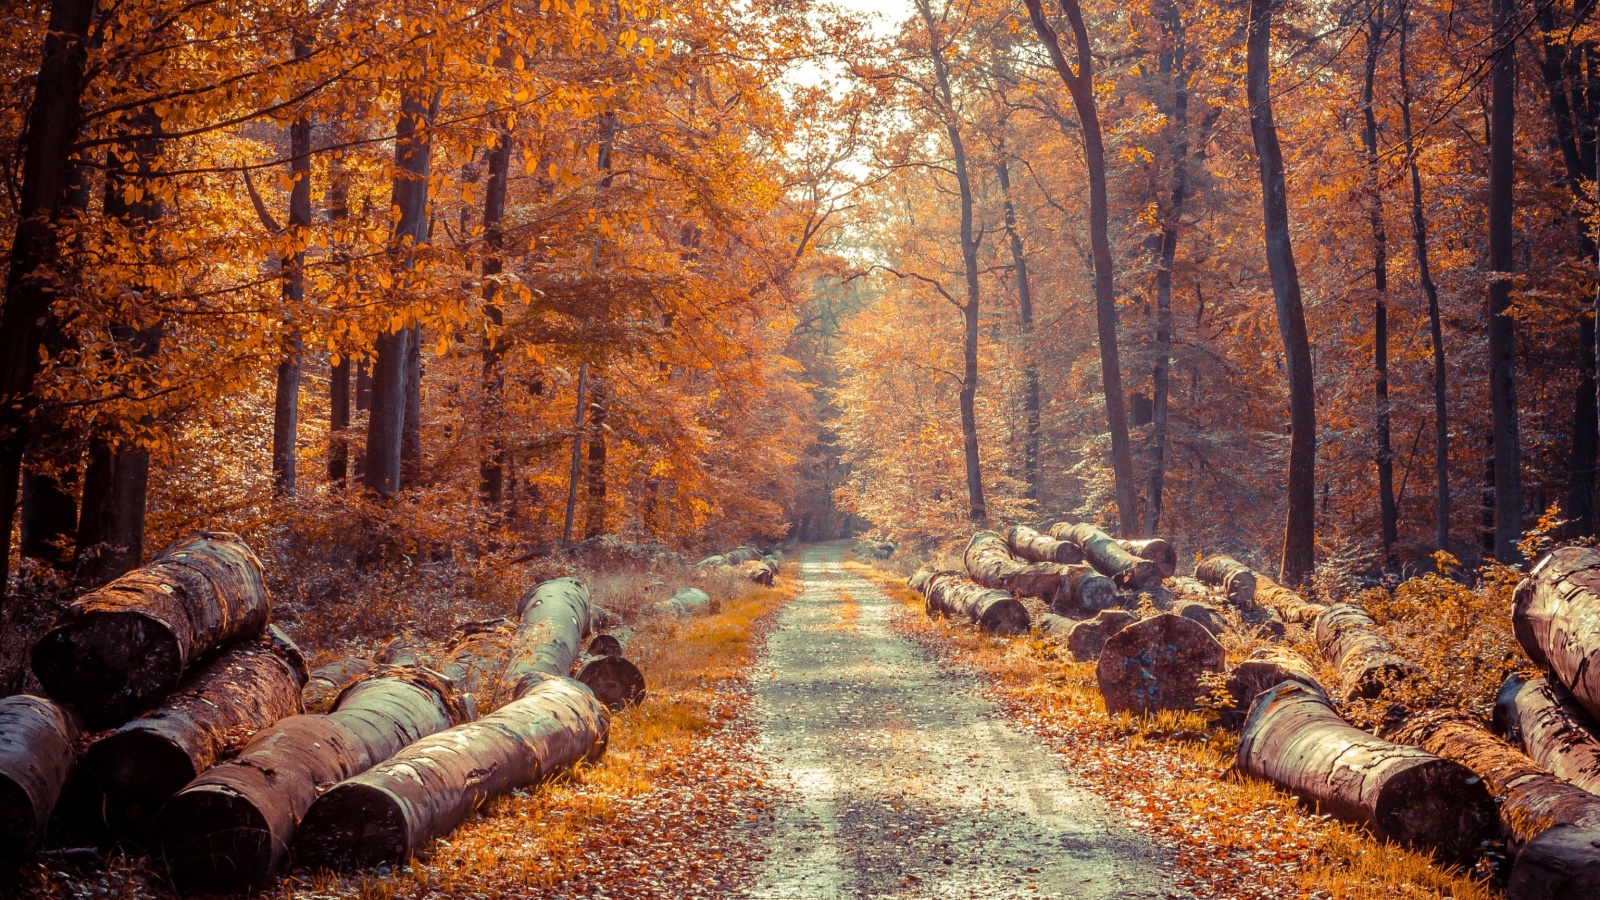 Road in the wild autumn forest screenshot #1 1600x900